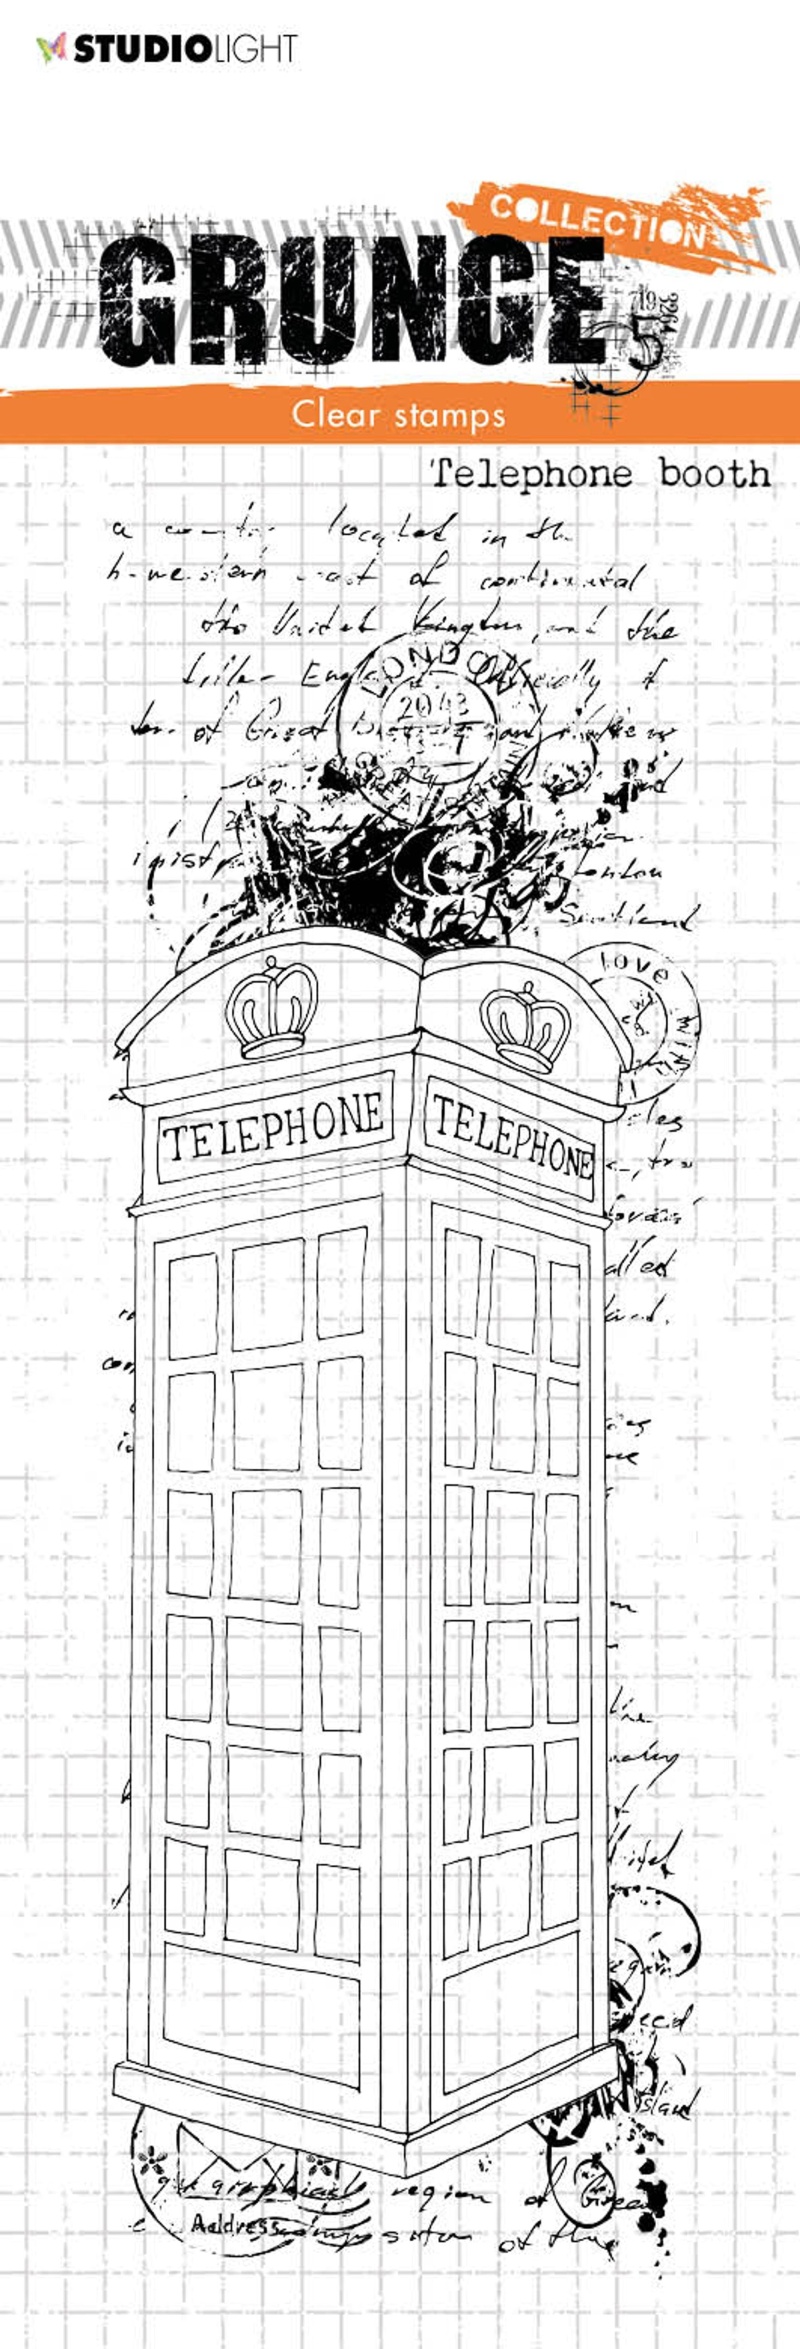 Sl Clear Stamp Telephone Booth Grunge Collection 210X74x3mm 1 Pc Nr.226